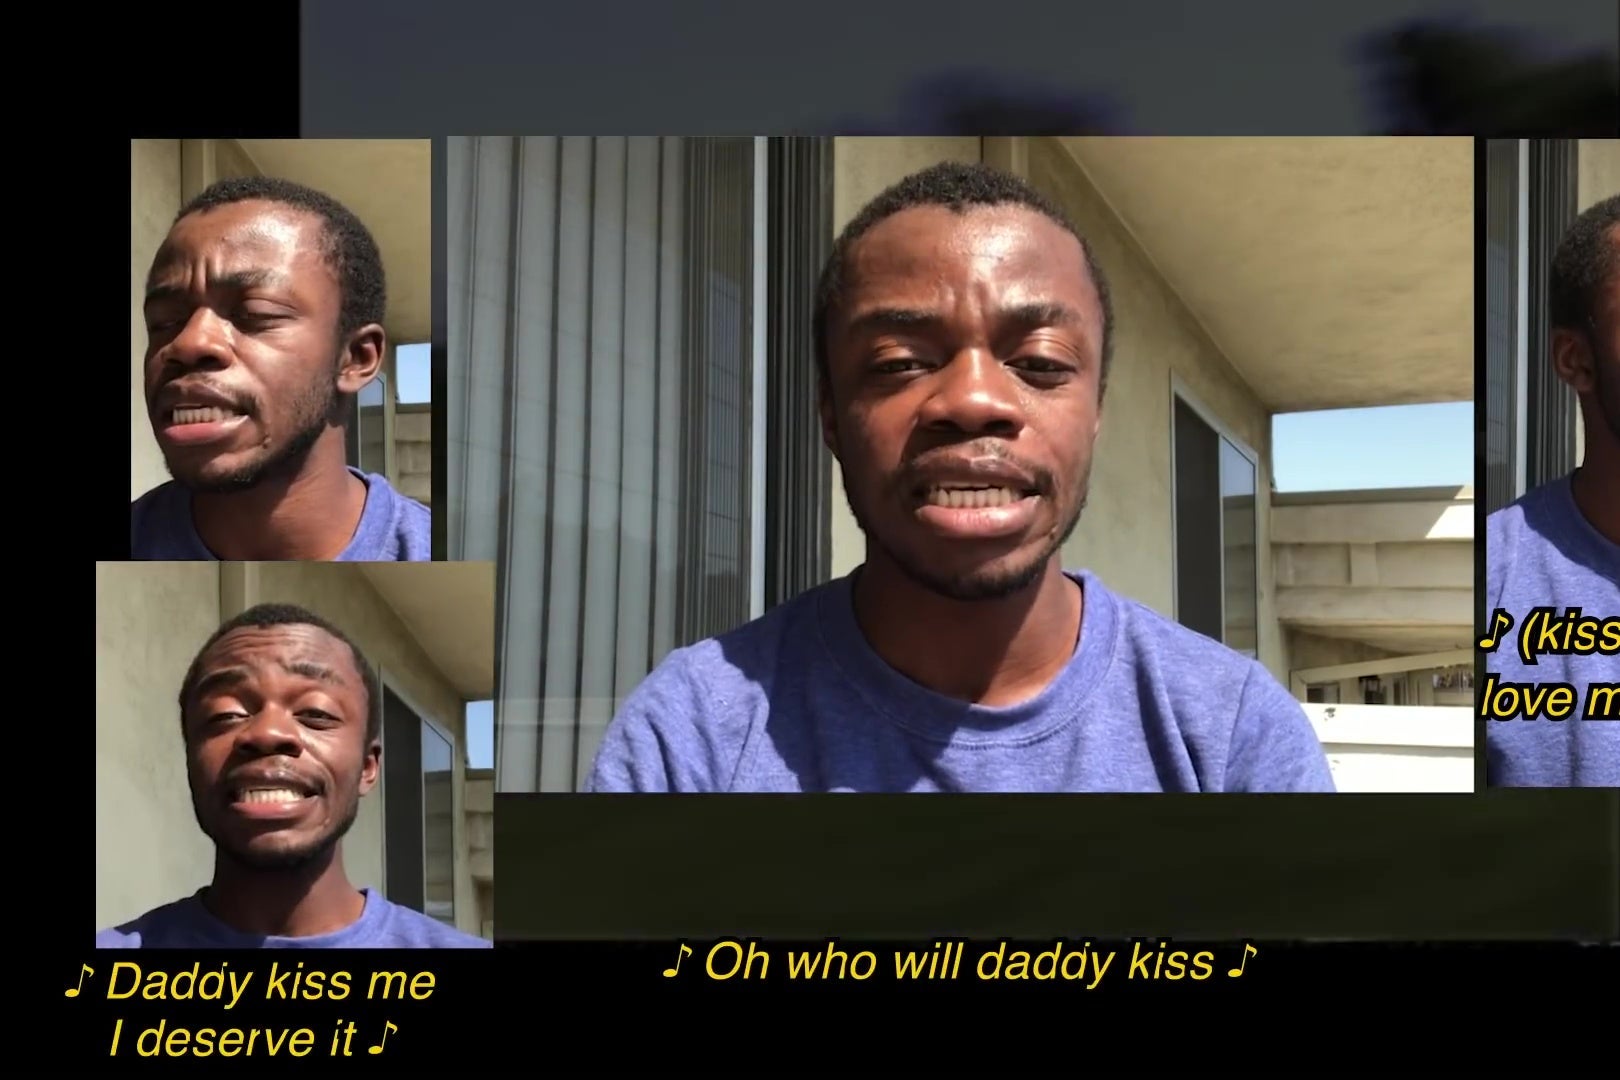 A YouTube style split-screen showing different versions of Demi Adejuyigbe singing in harmony with himself.